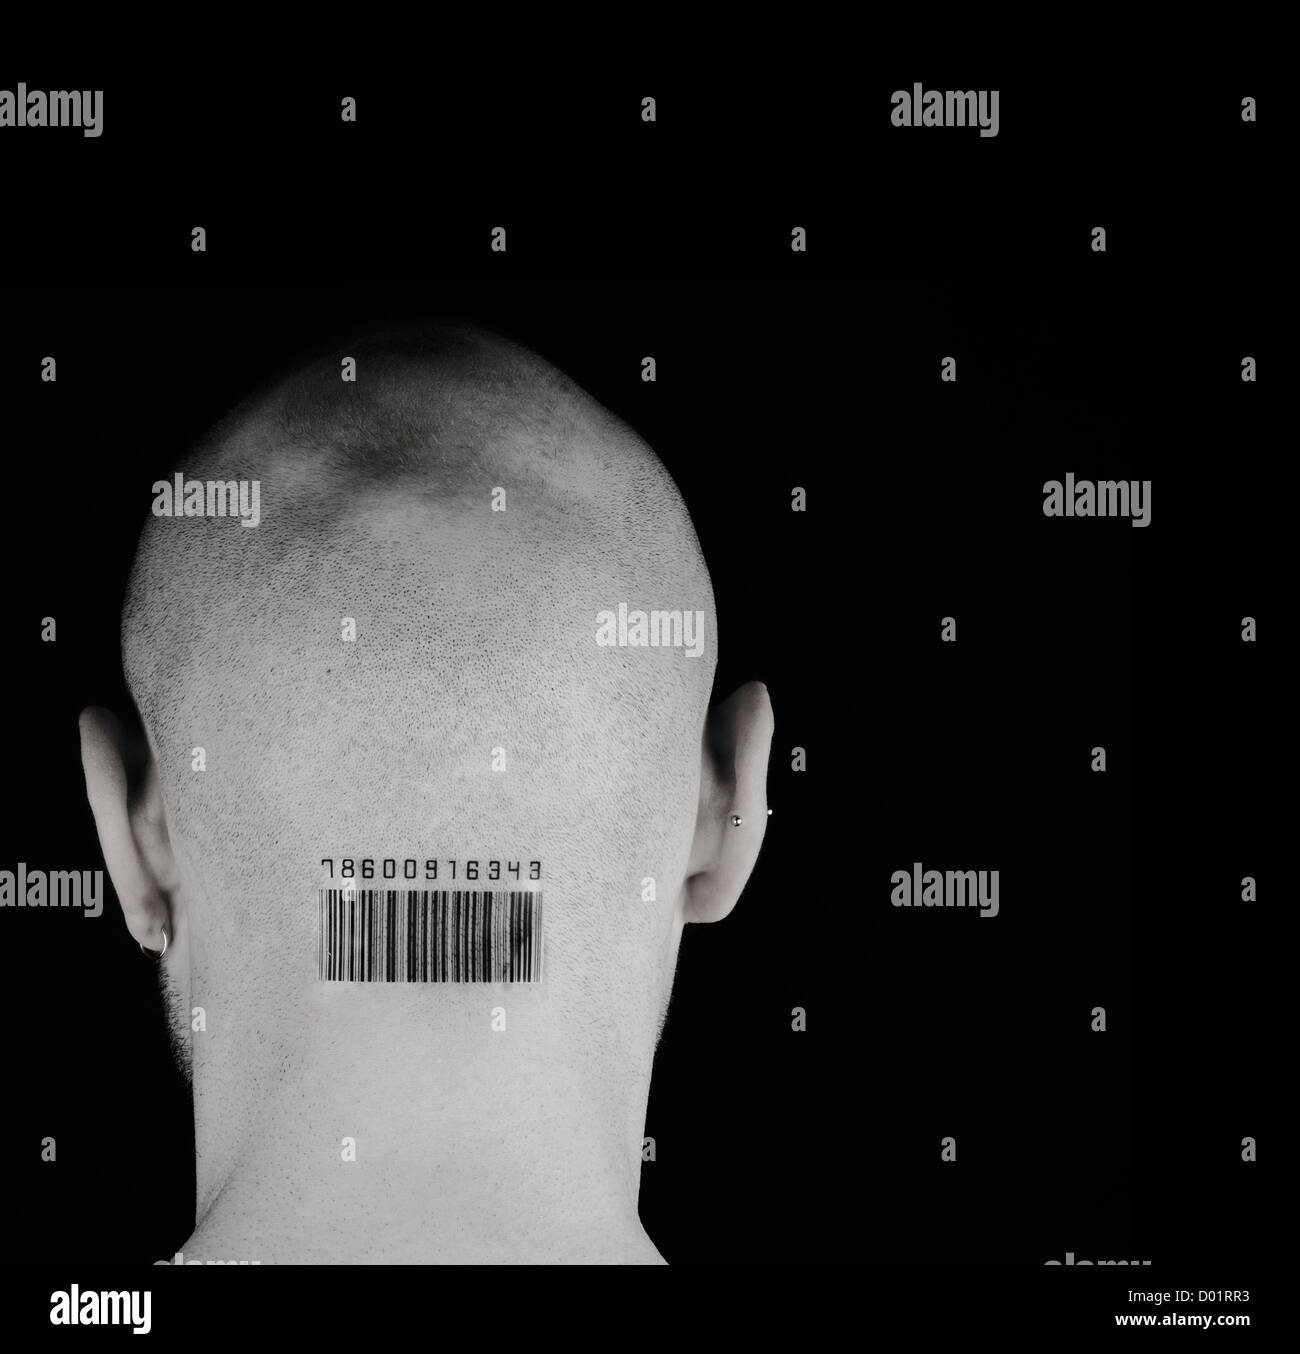 Man with bar code on head against black background Stock Photo